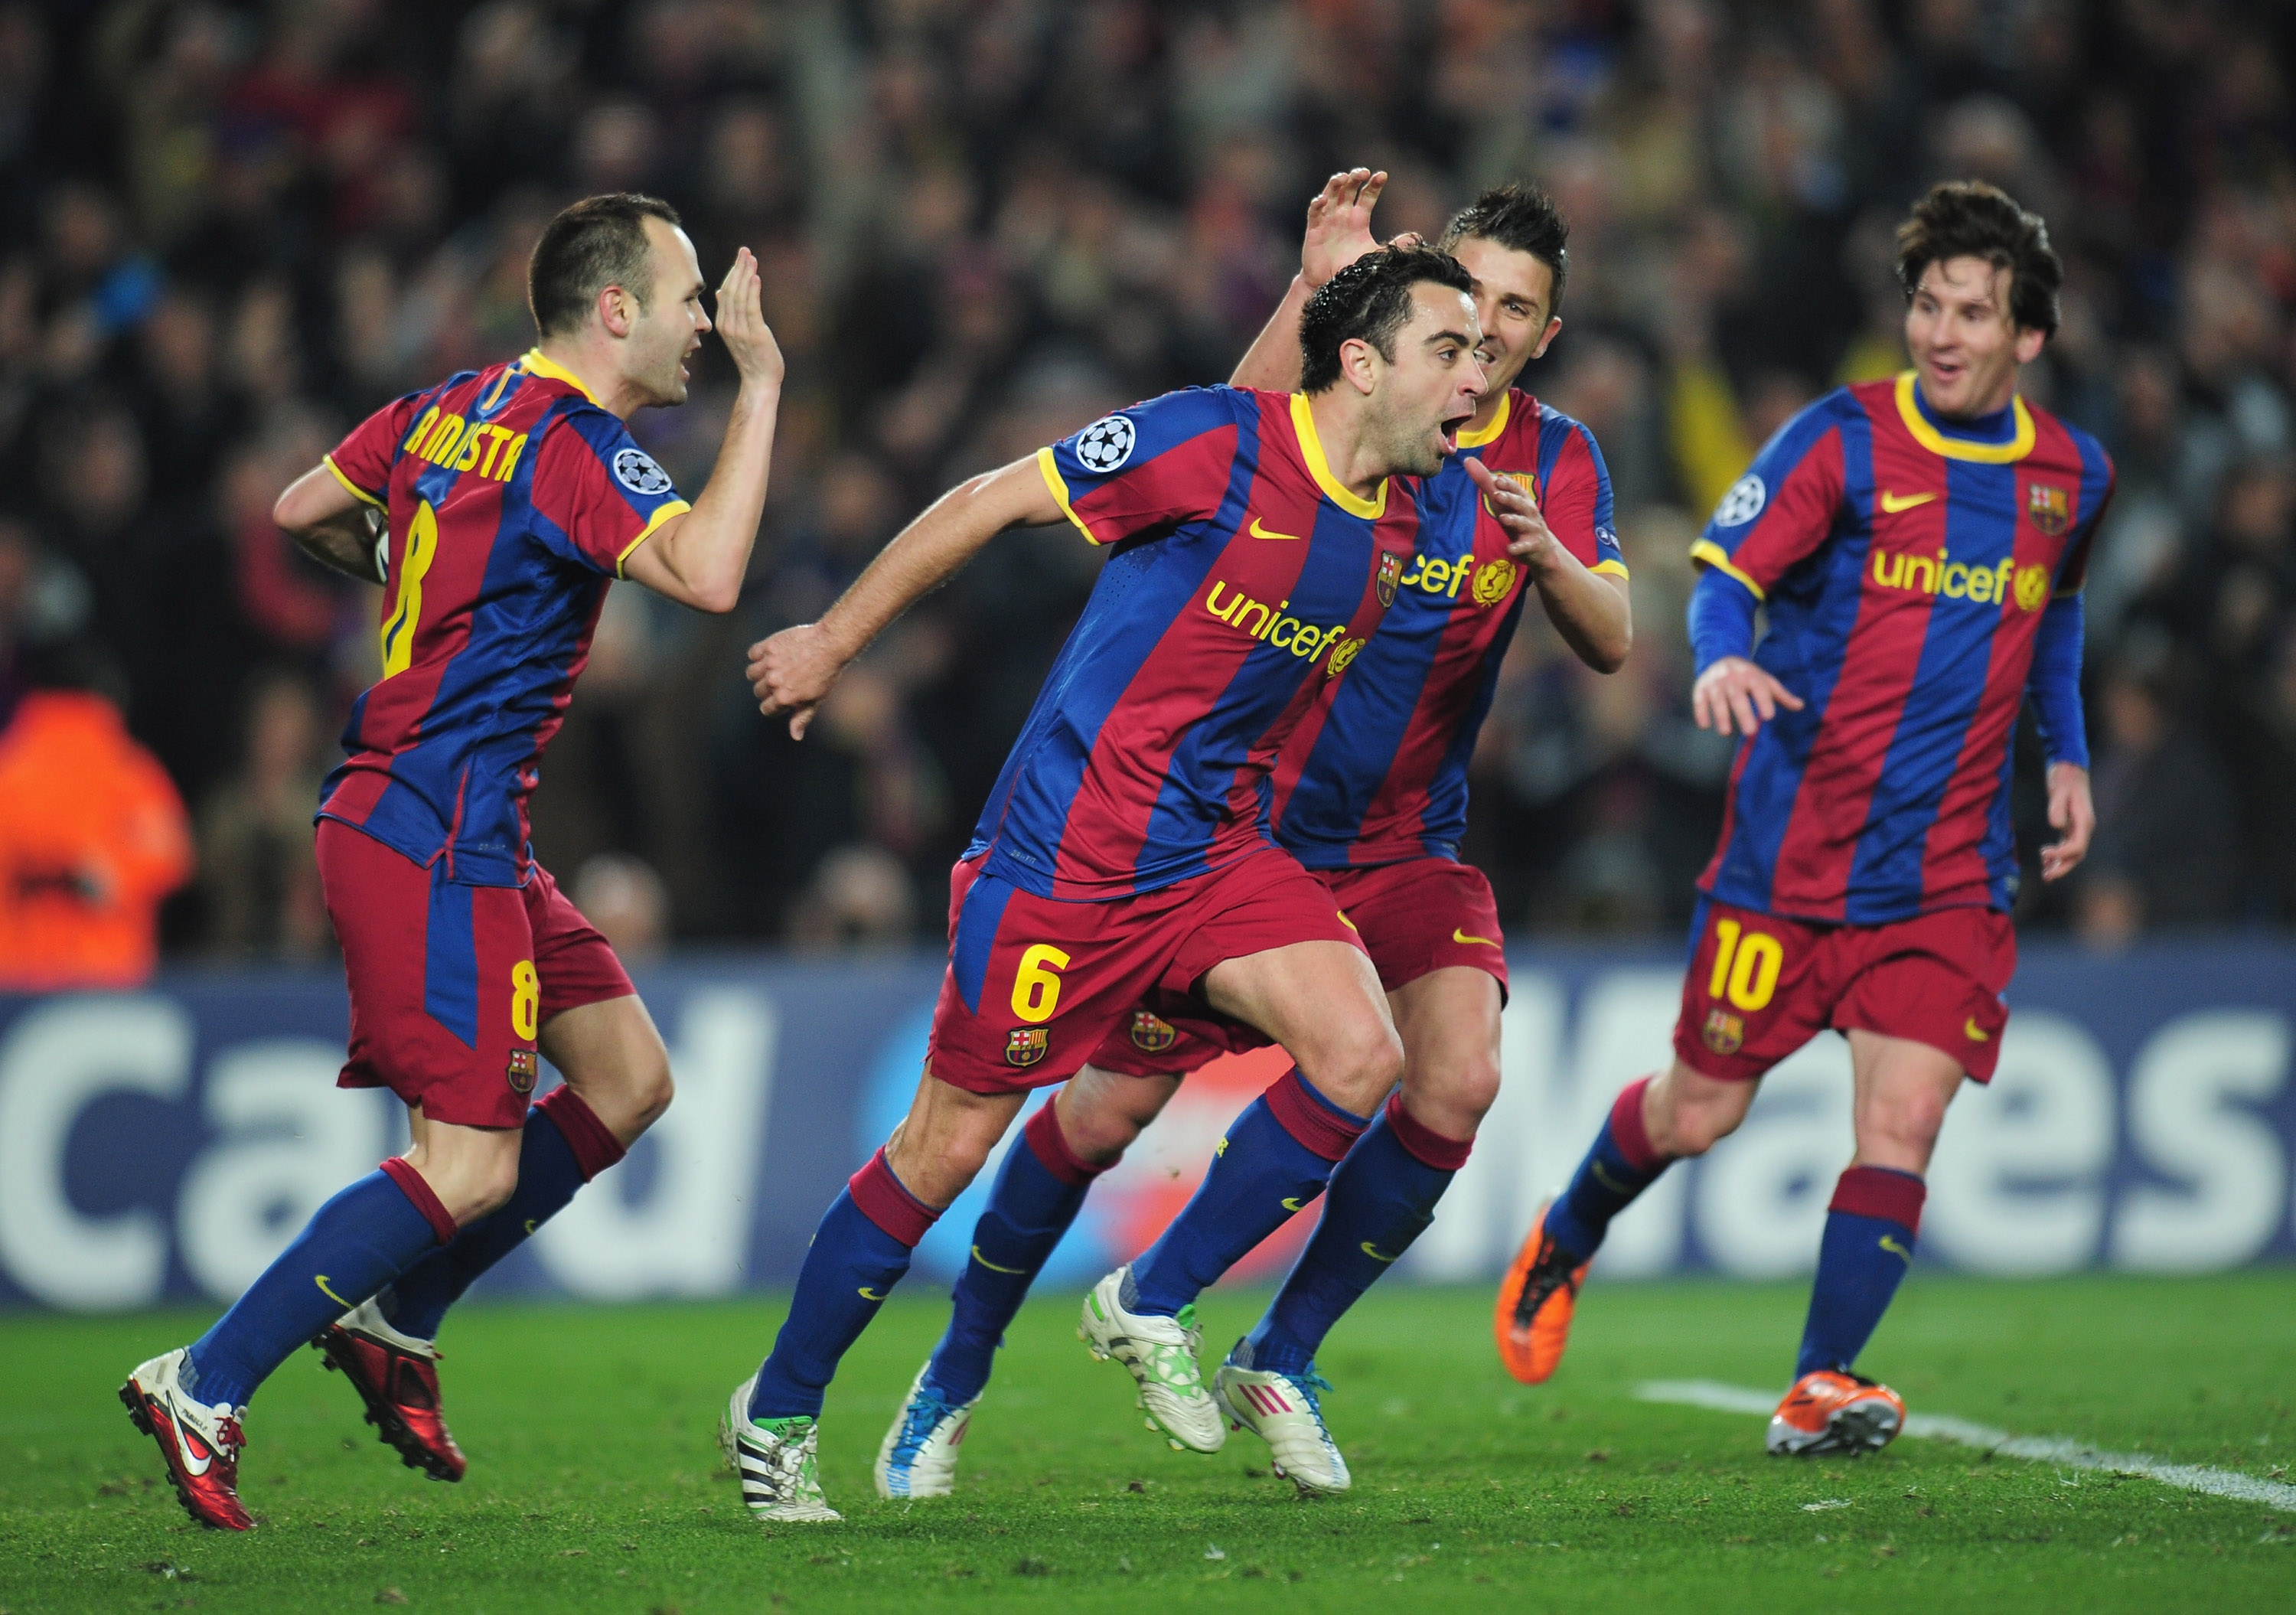 BARCELONA, SPAIN - MARCH 08:  Xavi Hernandez of Barcelona celebrates with team-mates David Villa and Andres Iniesta during the UEFA Champions League round of 16 second leg match between Barcelona and Arsenal at the Nou Camp Stadium on March 8, 2011 in Bar